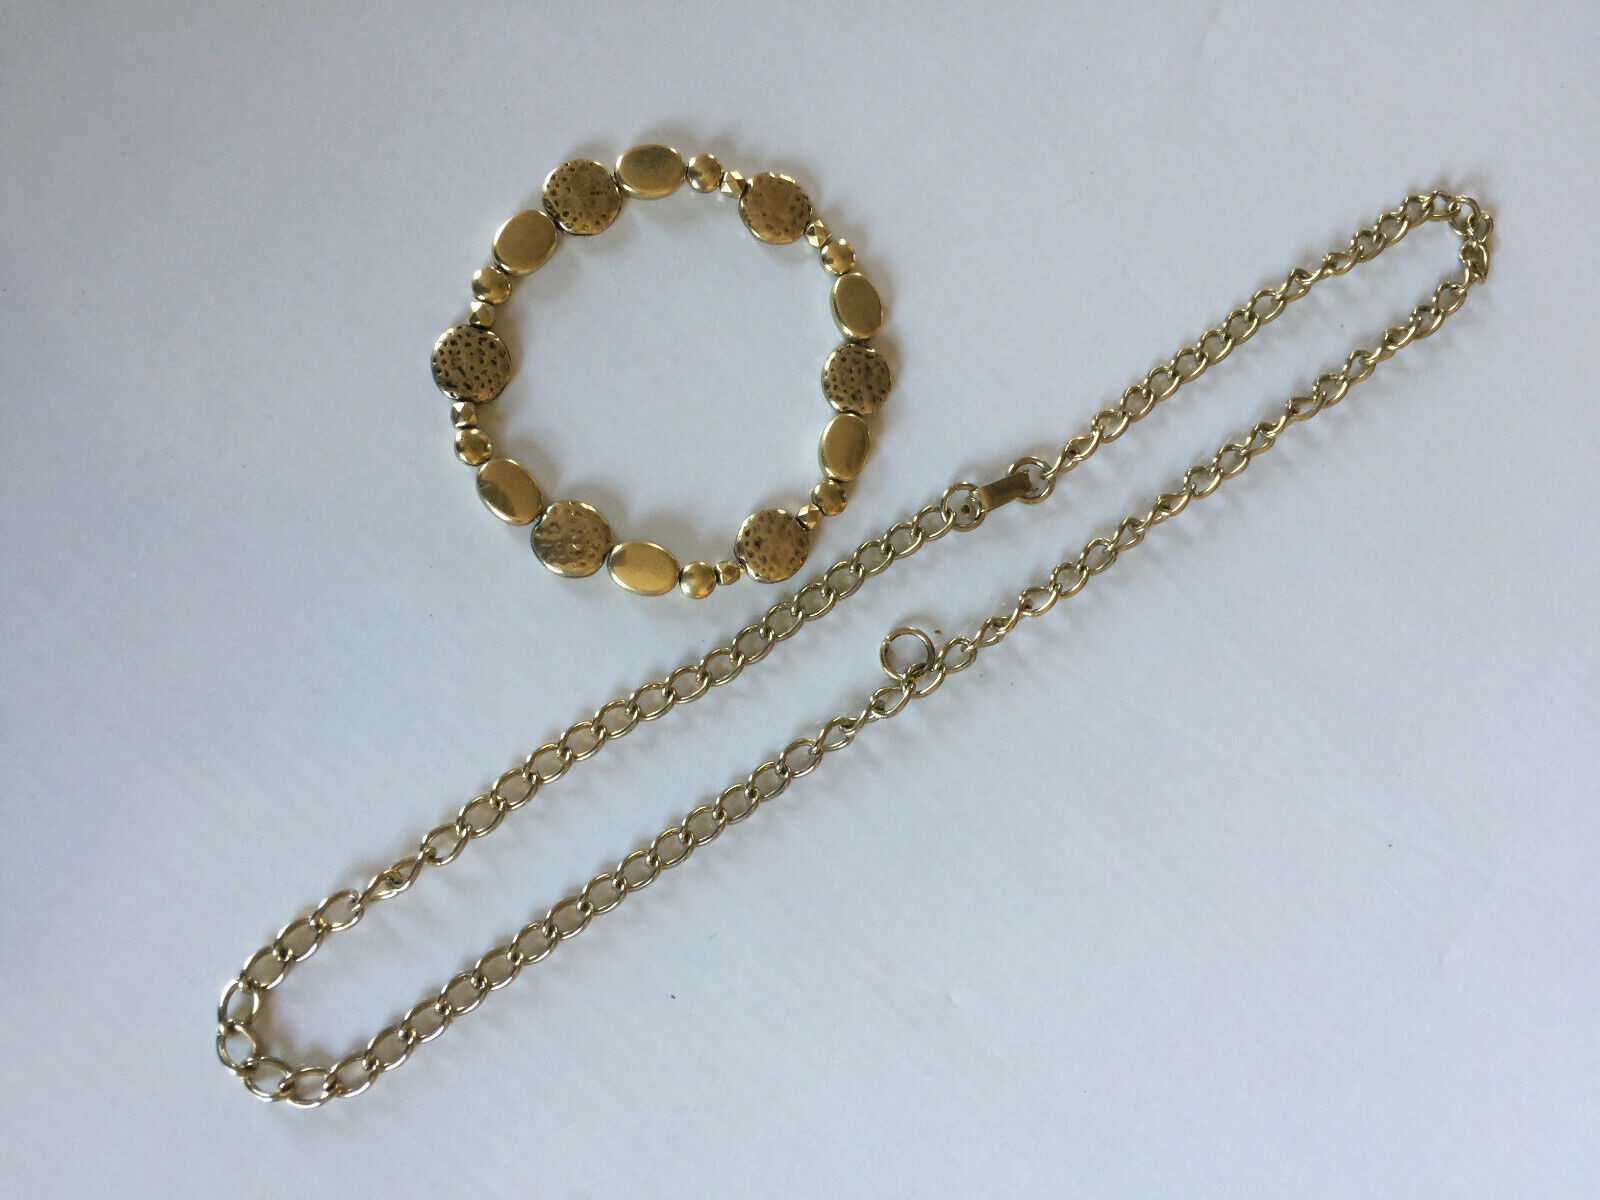 Original look 14k gold plated silver beads Bracelet & silver tone chain Necklace